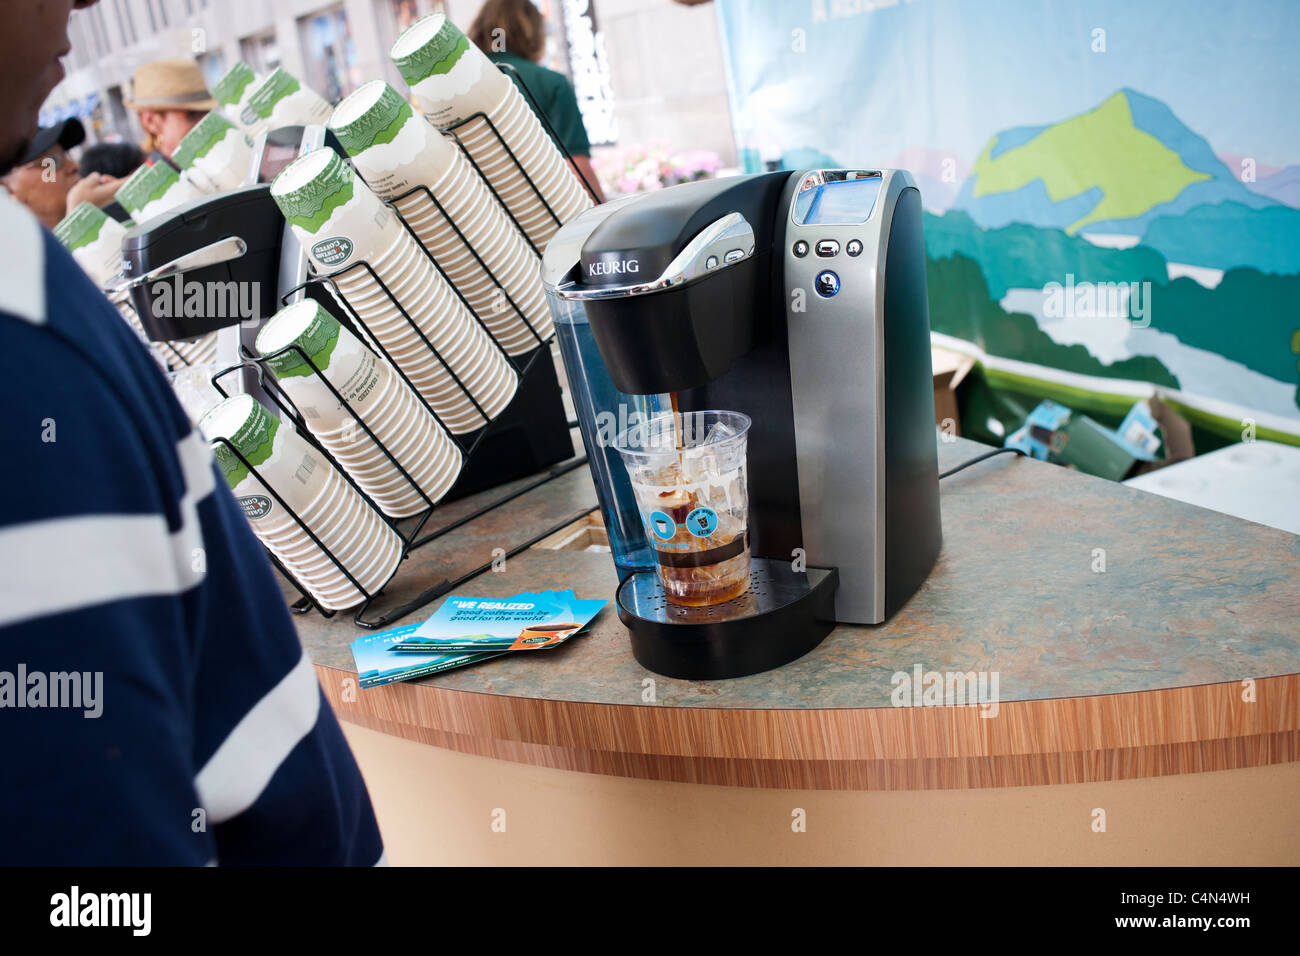 https://c8.alamy.com/comp/C4N4WH/a-promotional-event-by-green-mountain-coffee-roasters-is-seen-in-the-C4N4WH.jpg